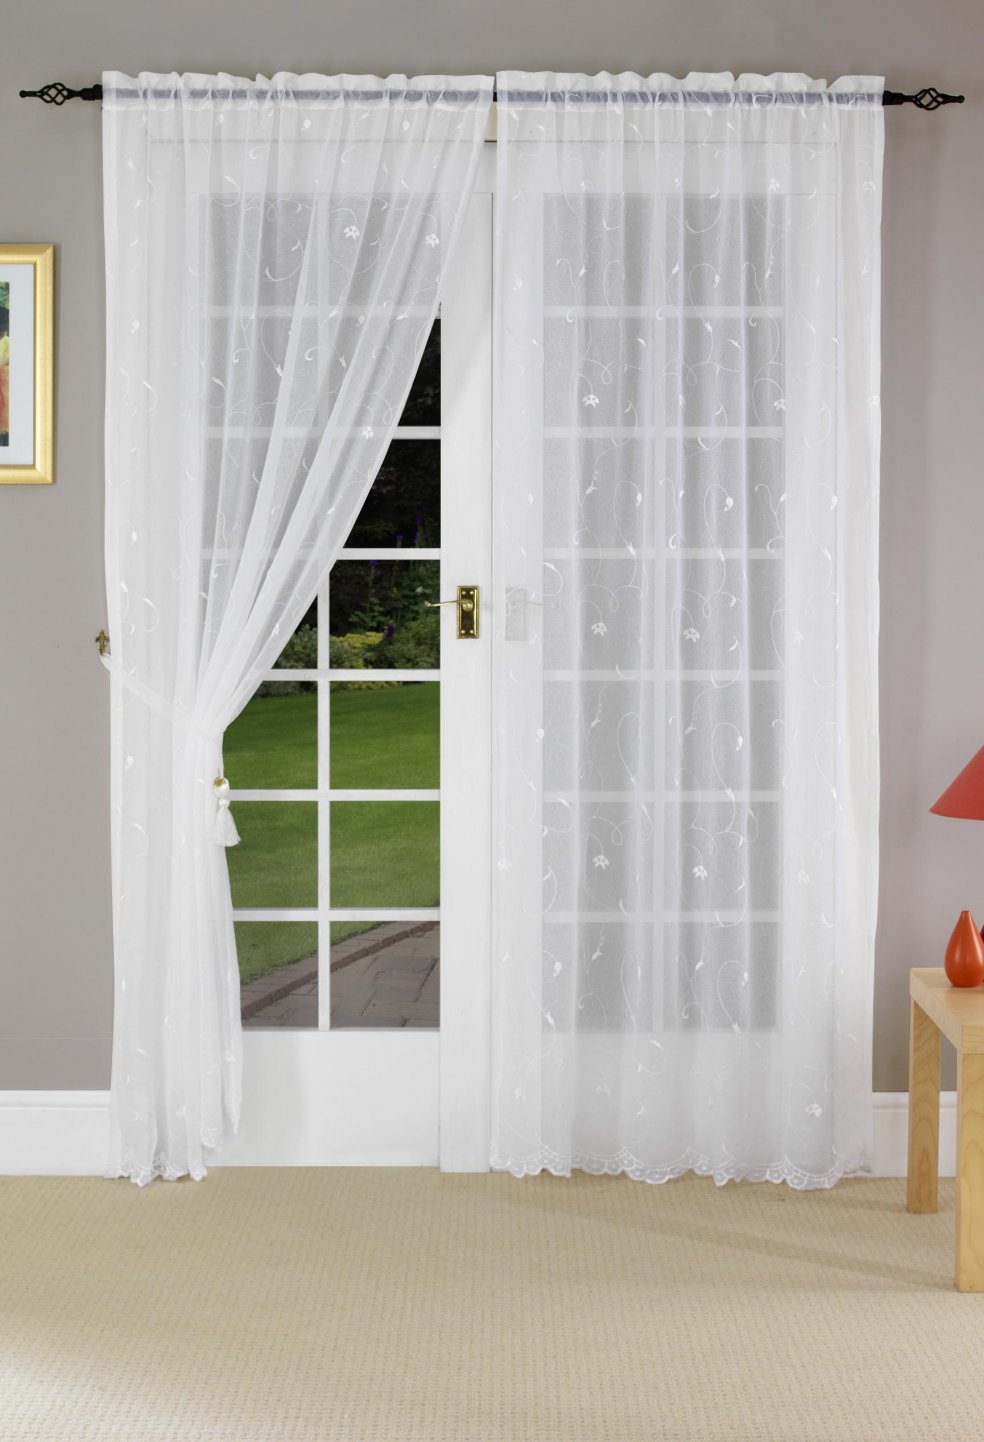 Voile Curtains in Curtain